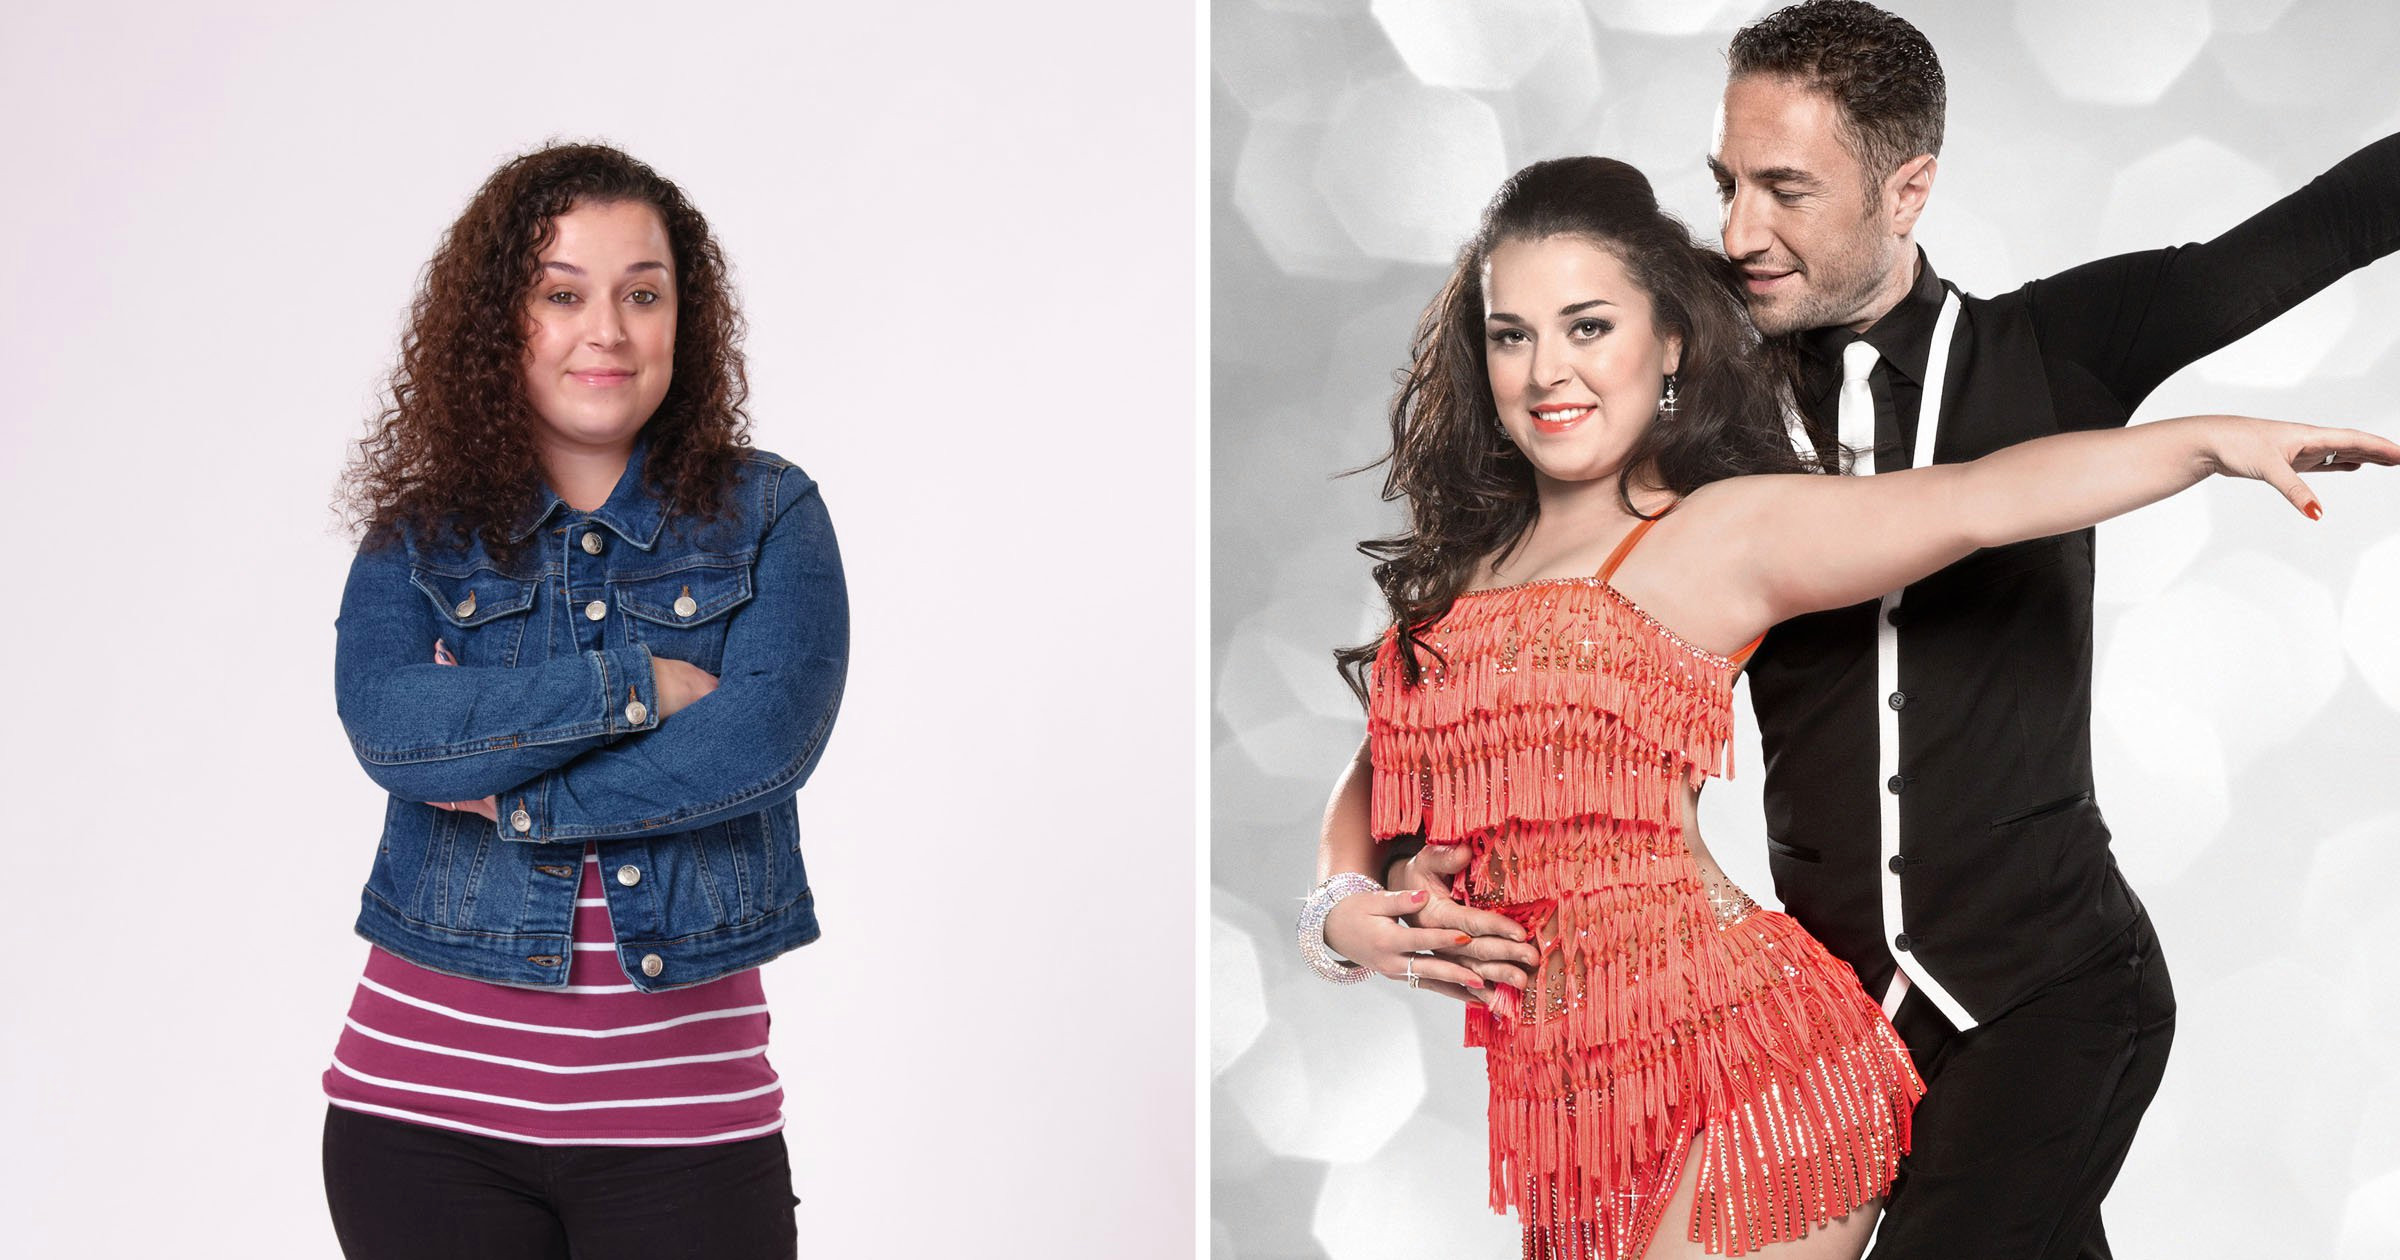 Tracy Beaker star Dani Harmer fat-shamed during time on Strictly Come Dancing despite being size six